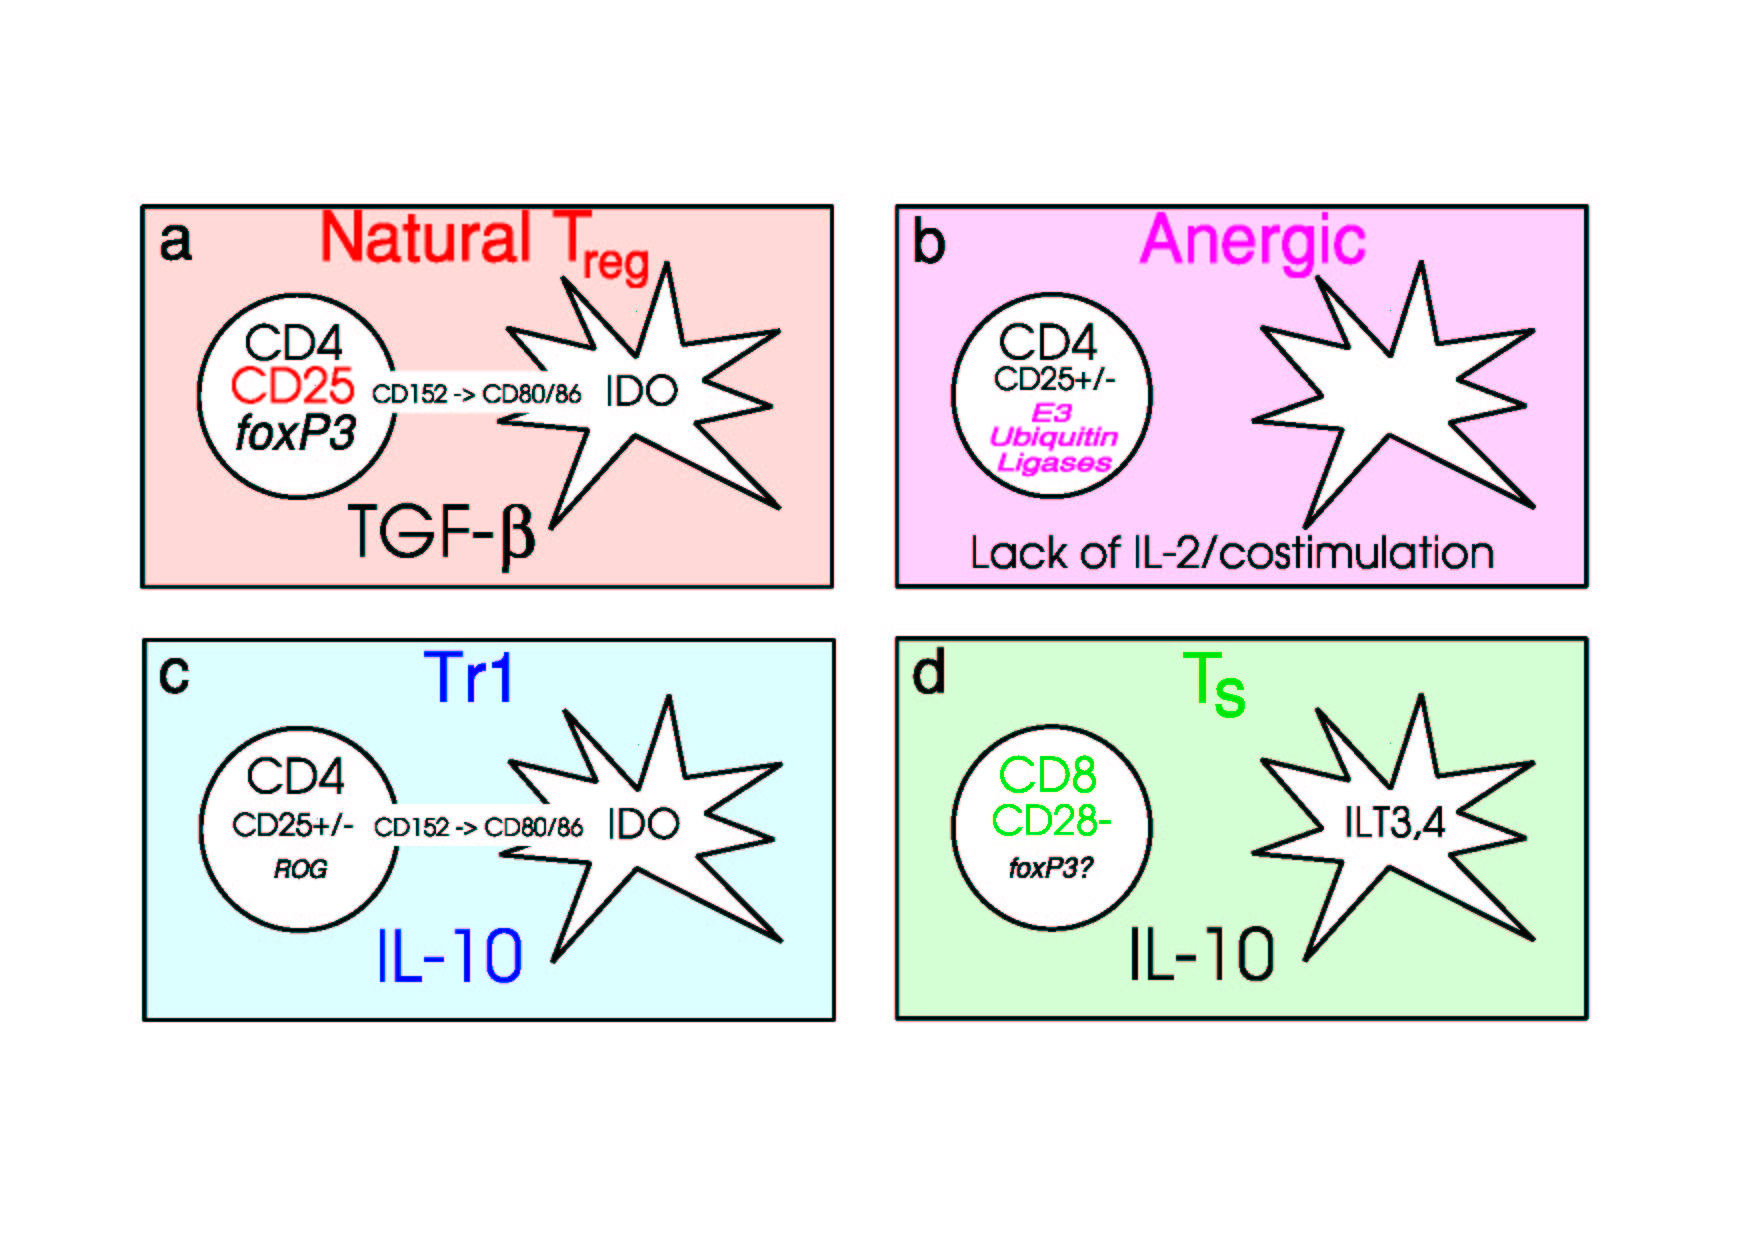 Diagram showing 4 types of regulatory T cells